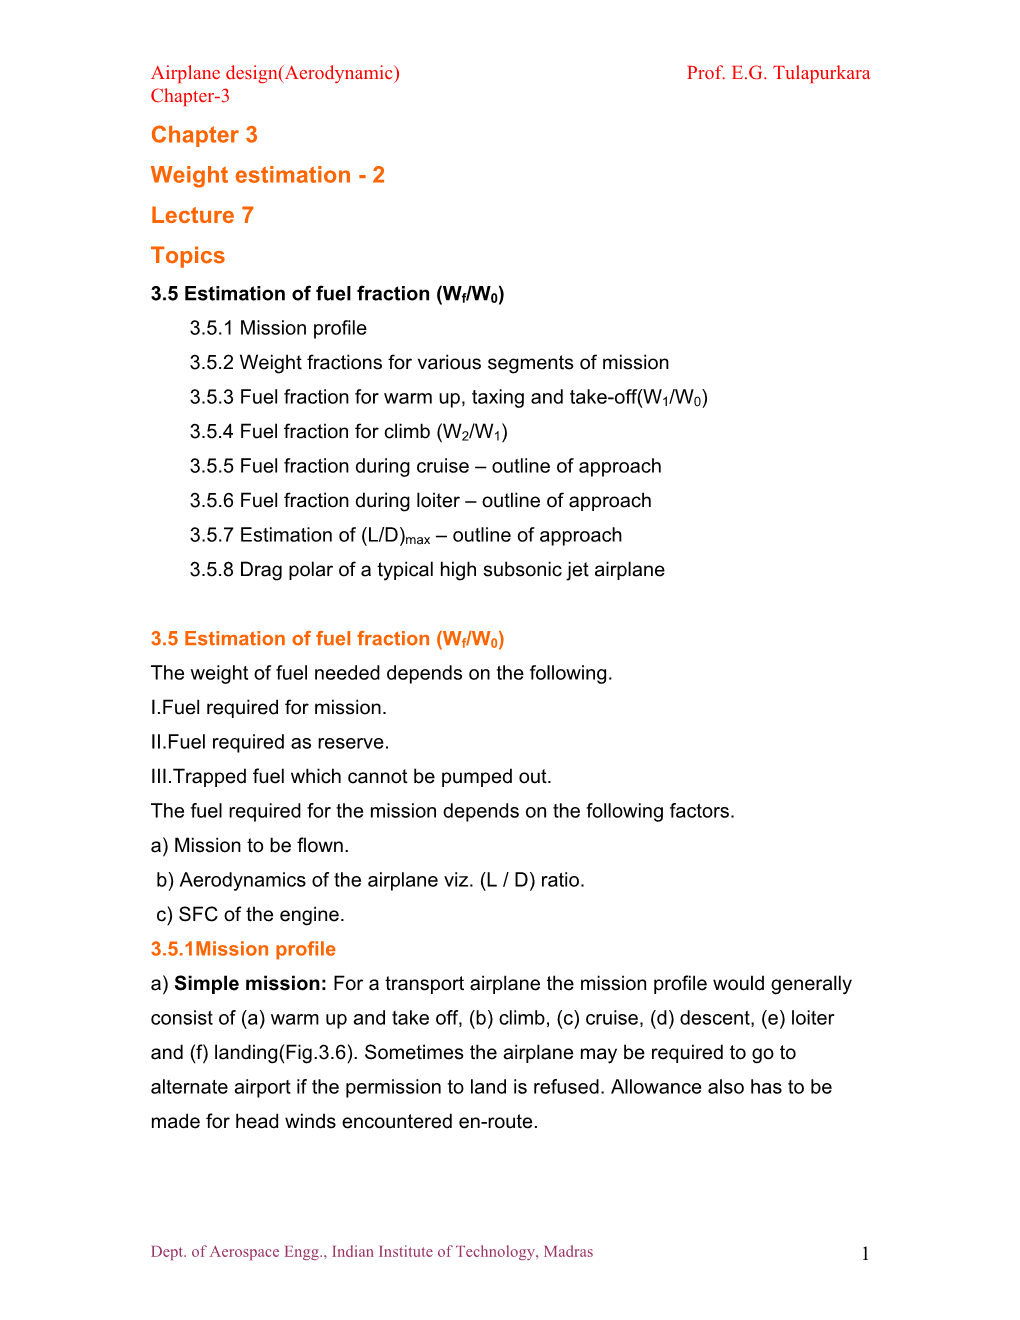 Chapter 3 Weight Estimation - 2 Lecture 7 Topics